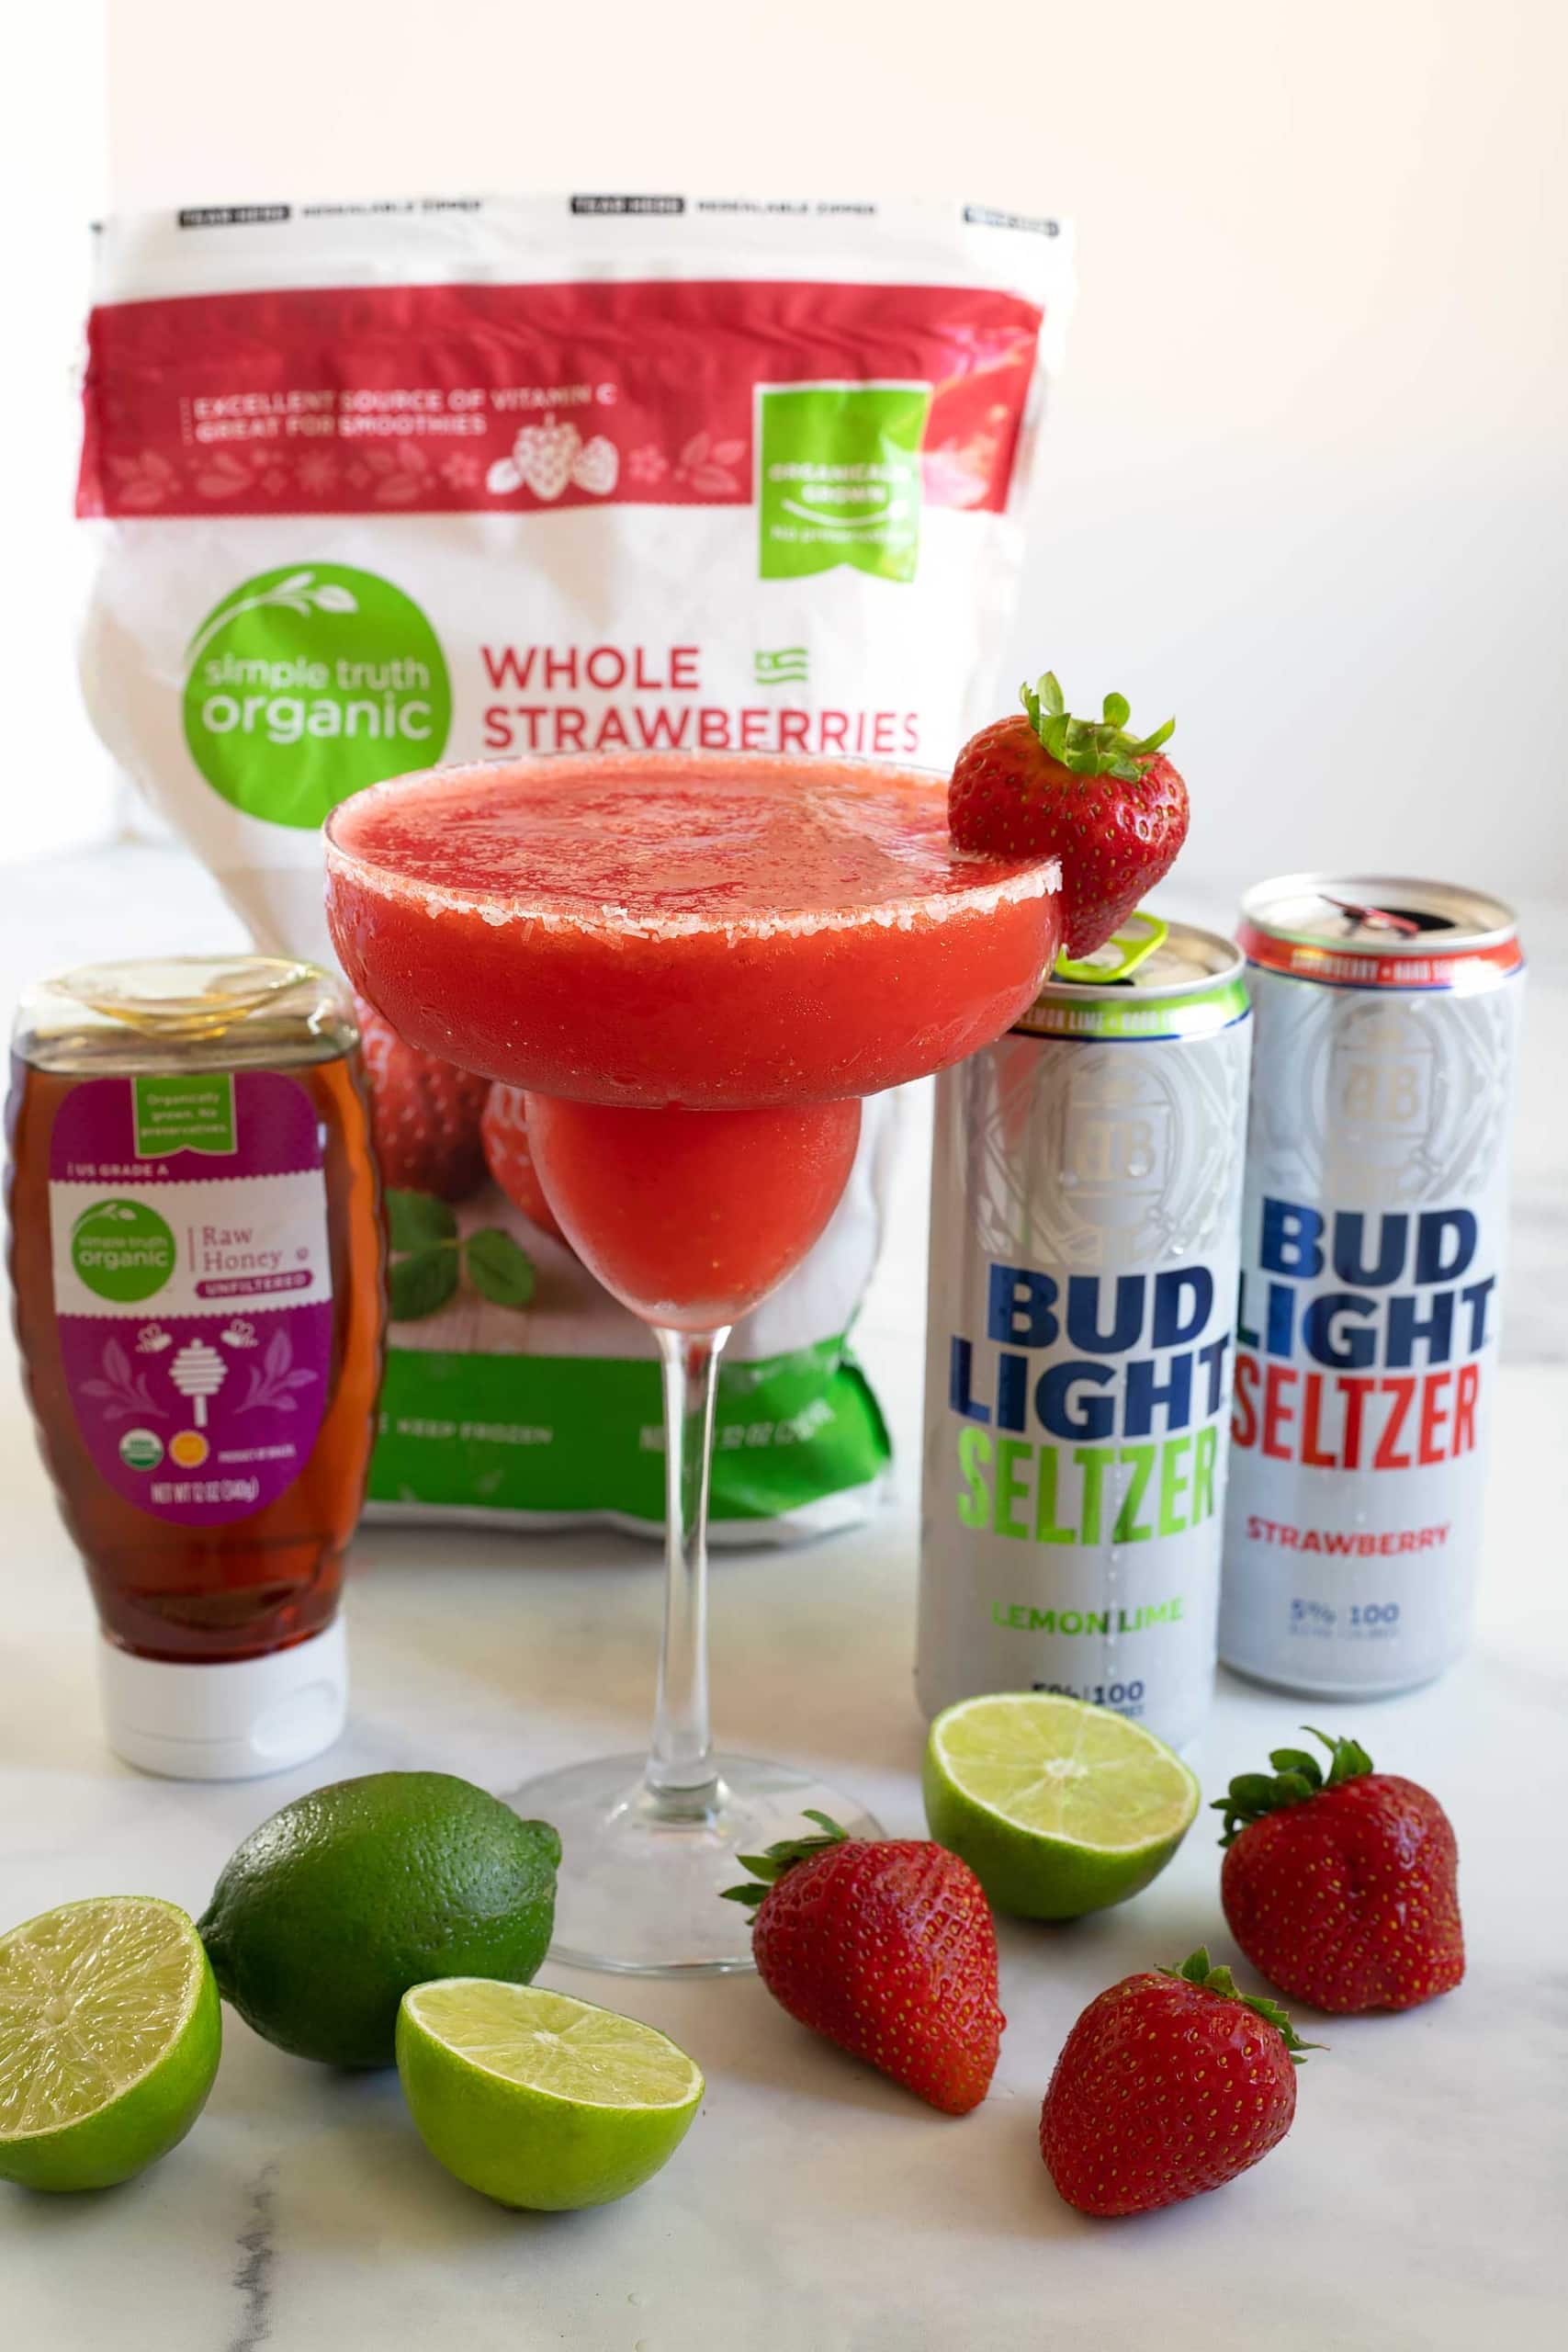 THE SELTZERITA - Margarita meets hard seltzer!! #ad Msg 4 21+ So refreshing and easy to make! Perfect for game day or really any occasion! These strawberry seltzeritas are gluten free, have no added sugar, and only take about 5 minutes to make! #BudLightSeltzerRecipe #UnquestionablyGood #SeltzerSZN #hardseltzer #healthycocktail #margarita #strawberrymargarita 